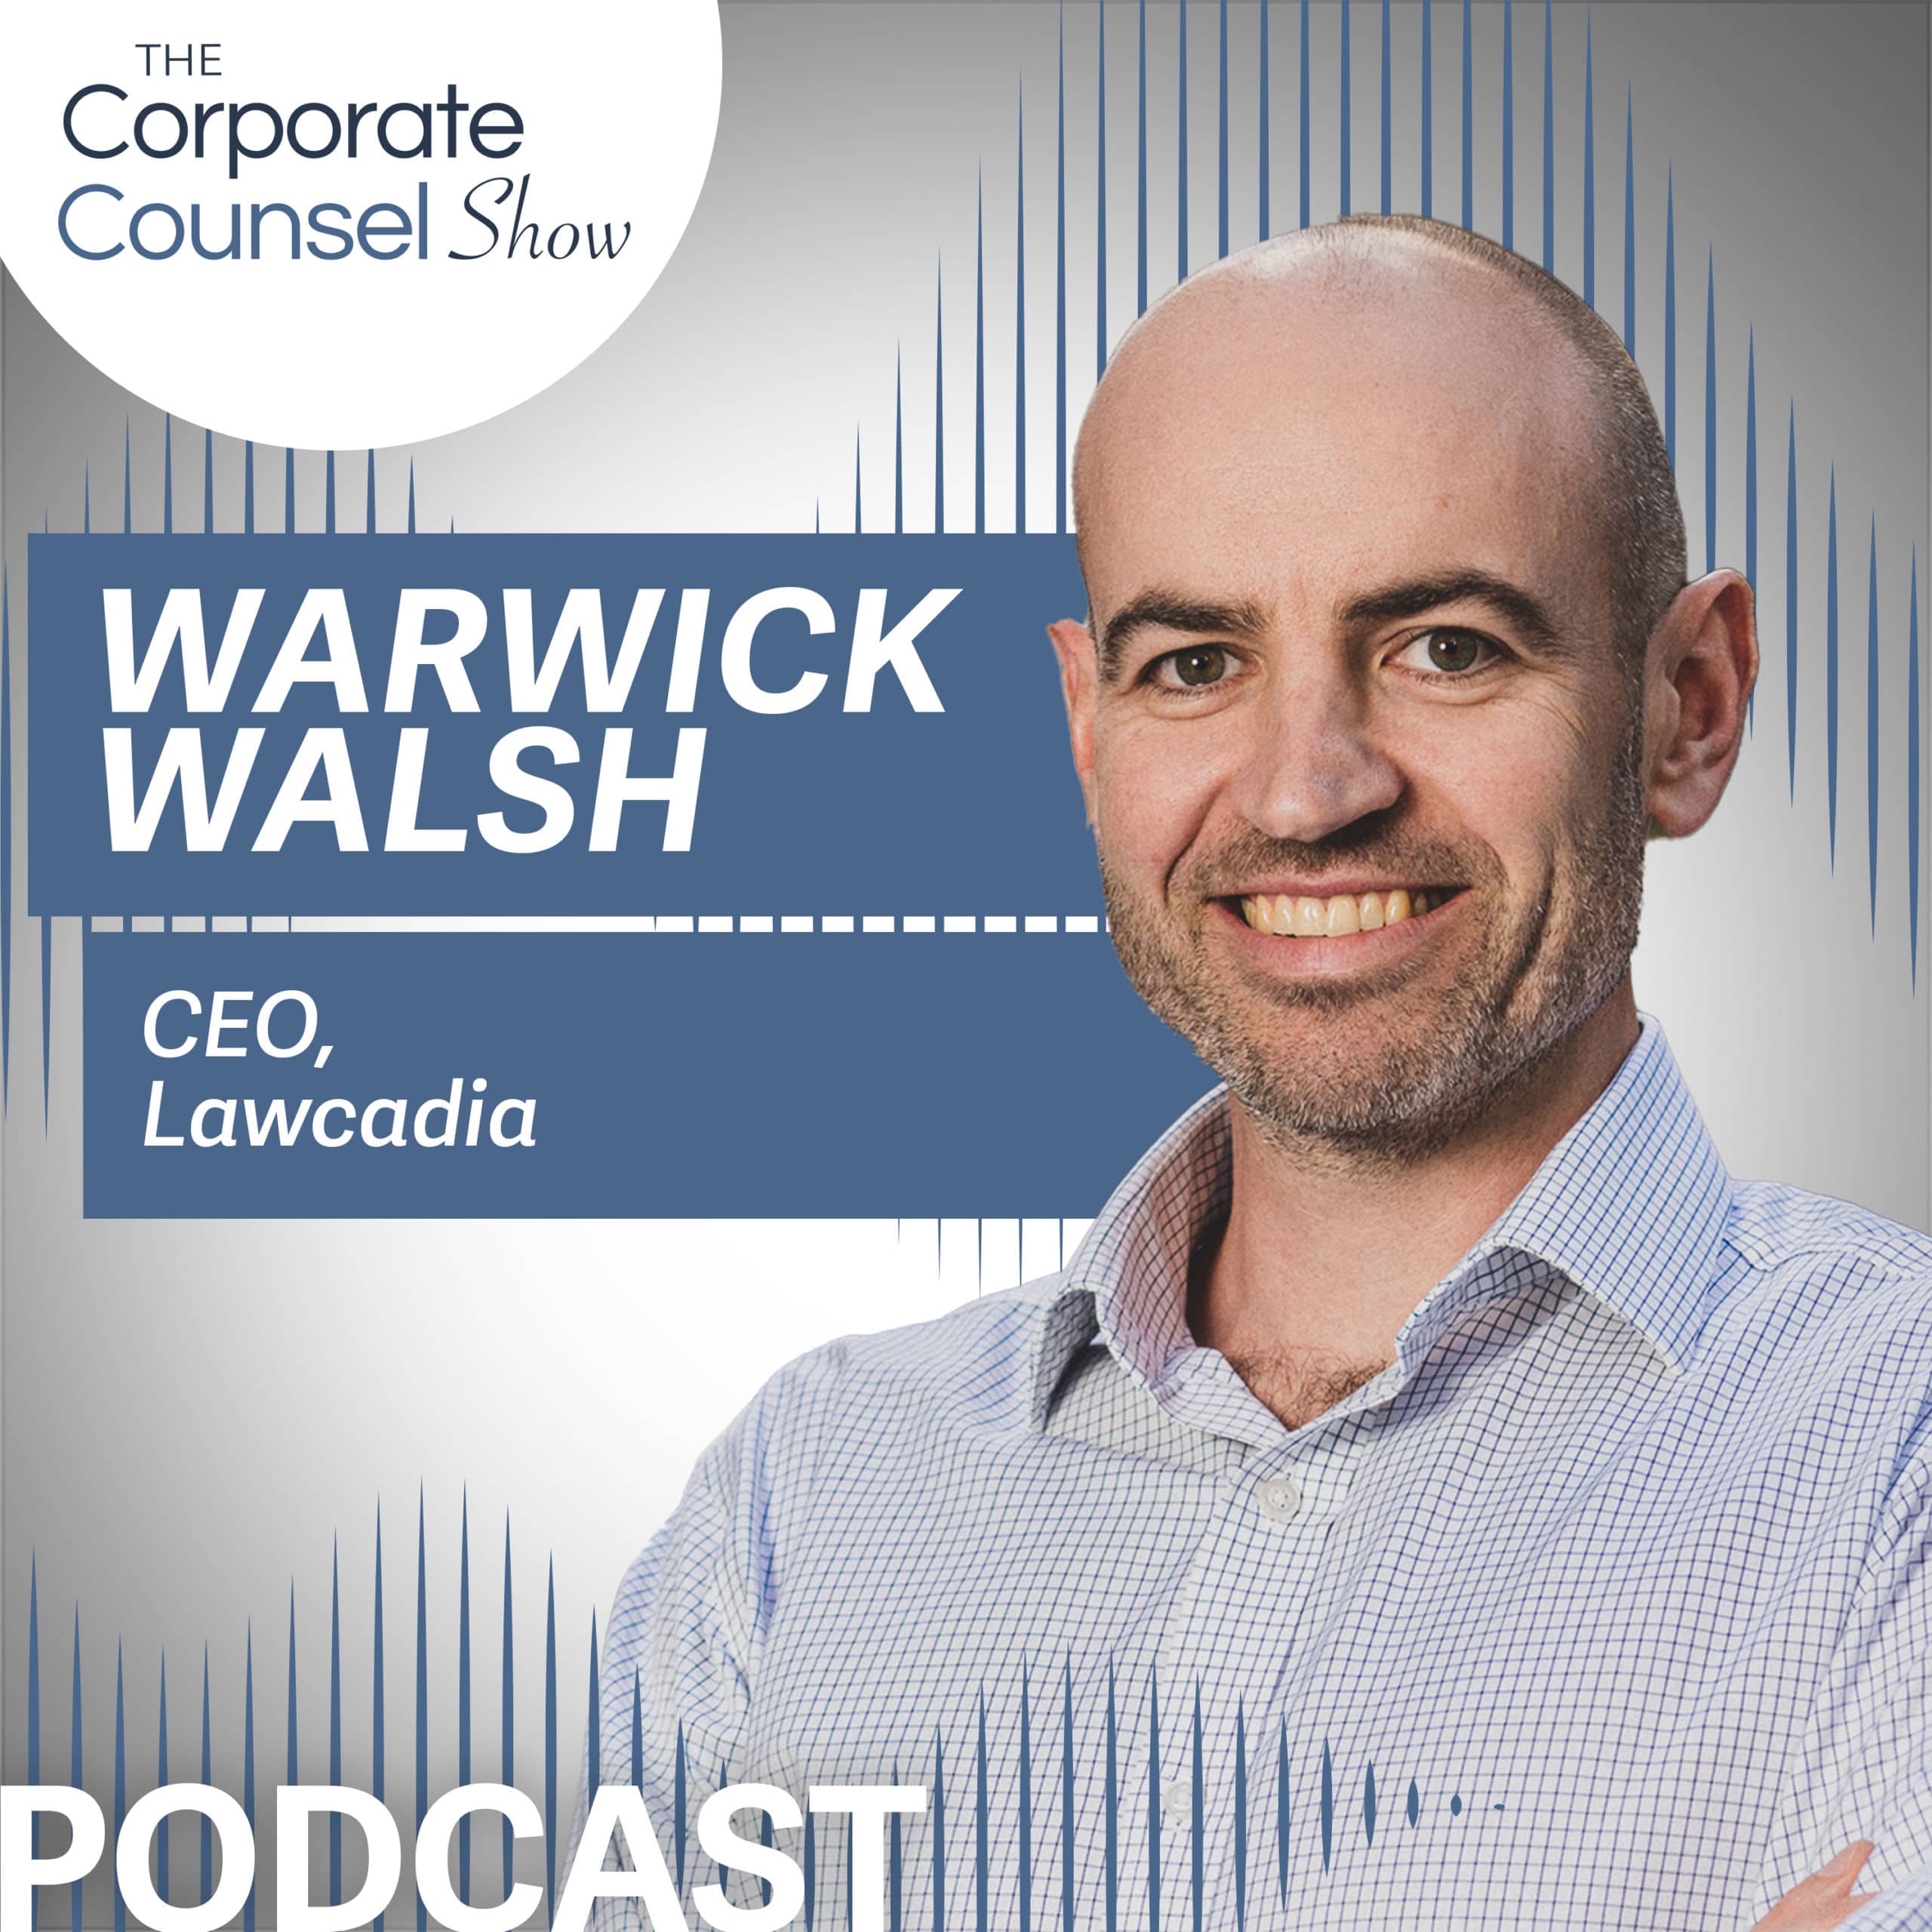 Podcast: Using Tech And Innovation To Scale A Business